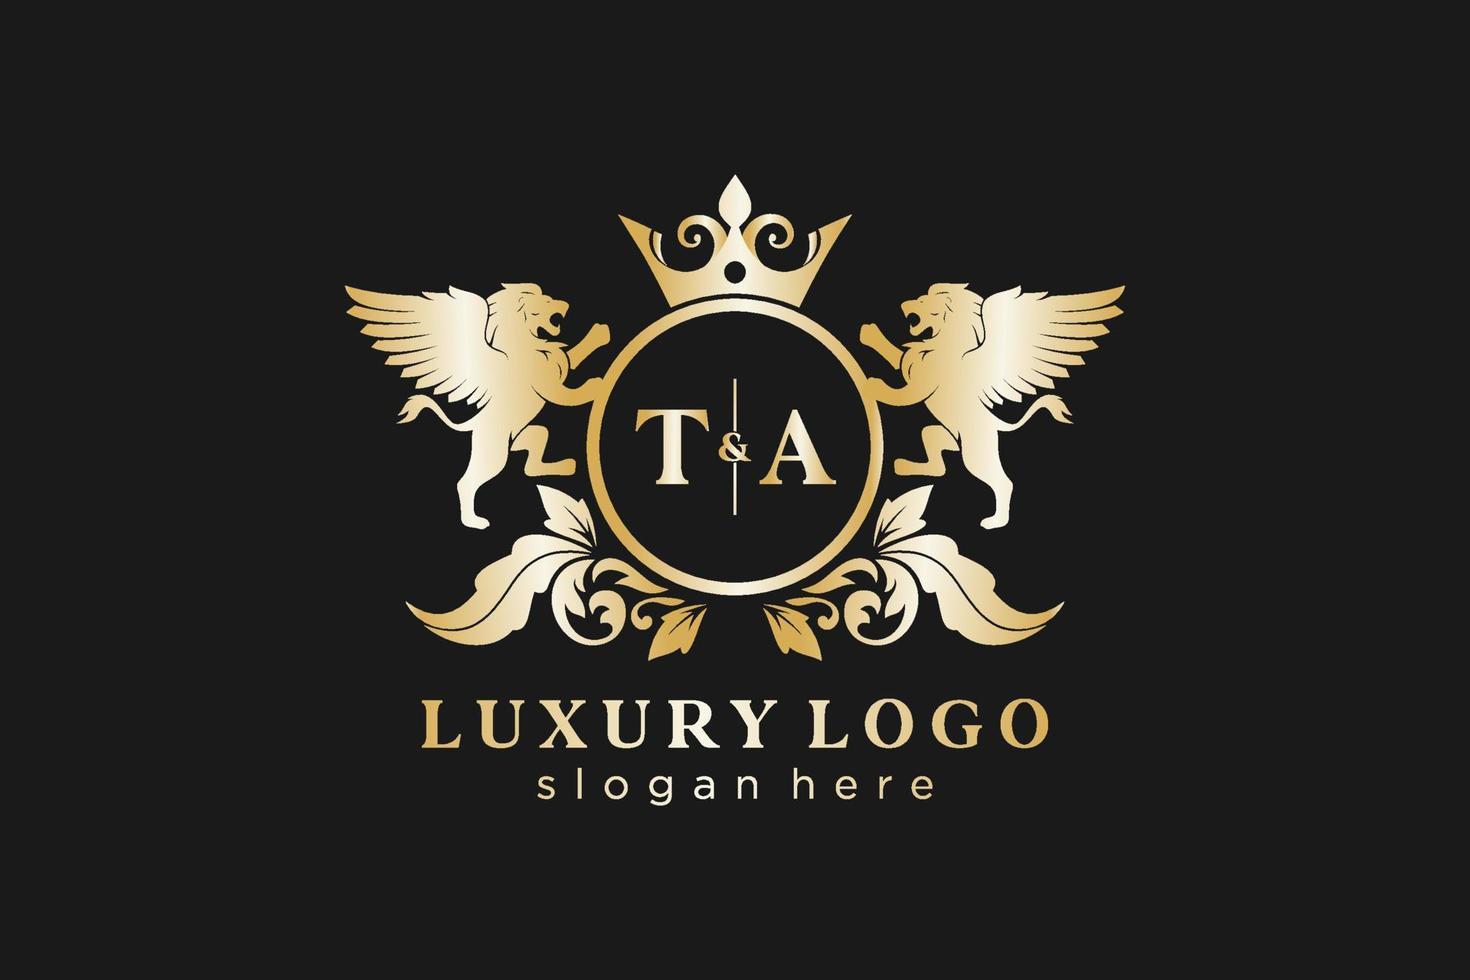 Initial TA Letter Lion Royal Luxury Logo template in vector art for Restaurant, Royalty, Boutique, Cafe, Hotel, Heraldic, Jewelry, Fashion and other vector illustration.